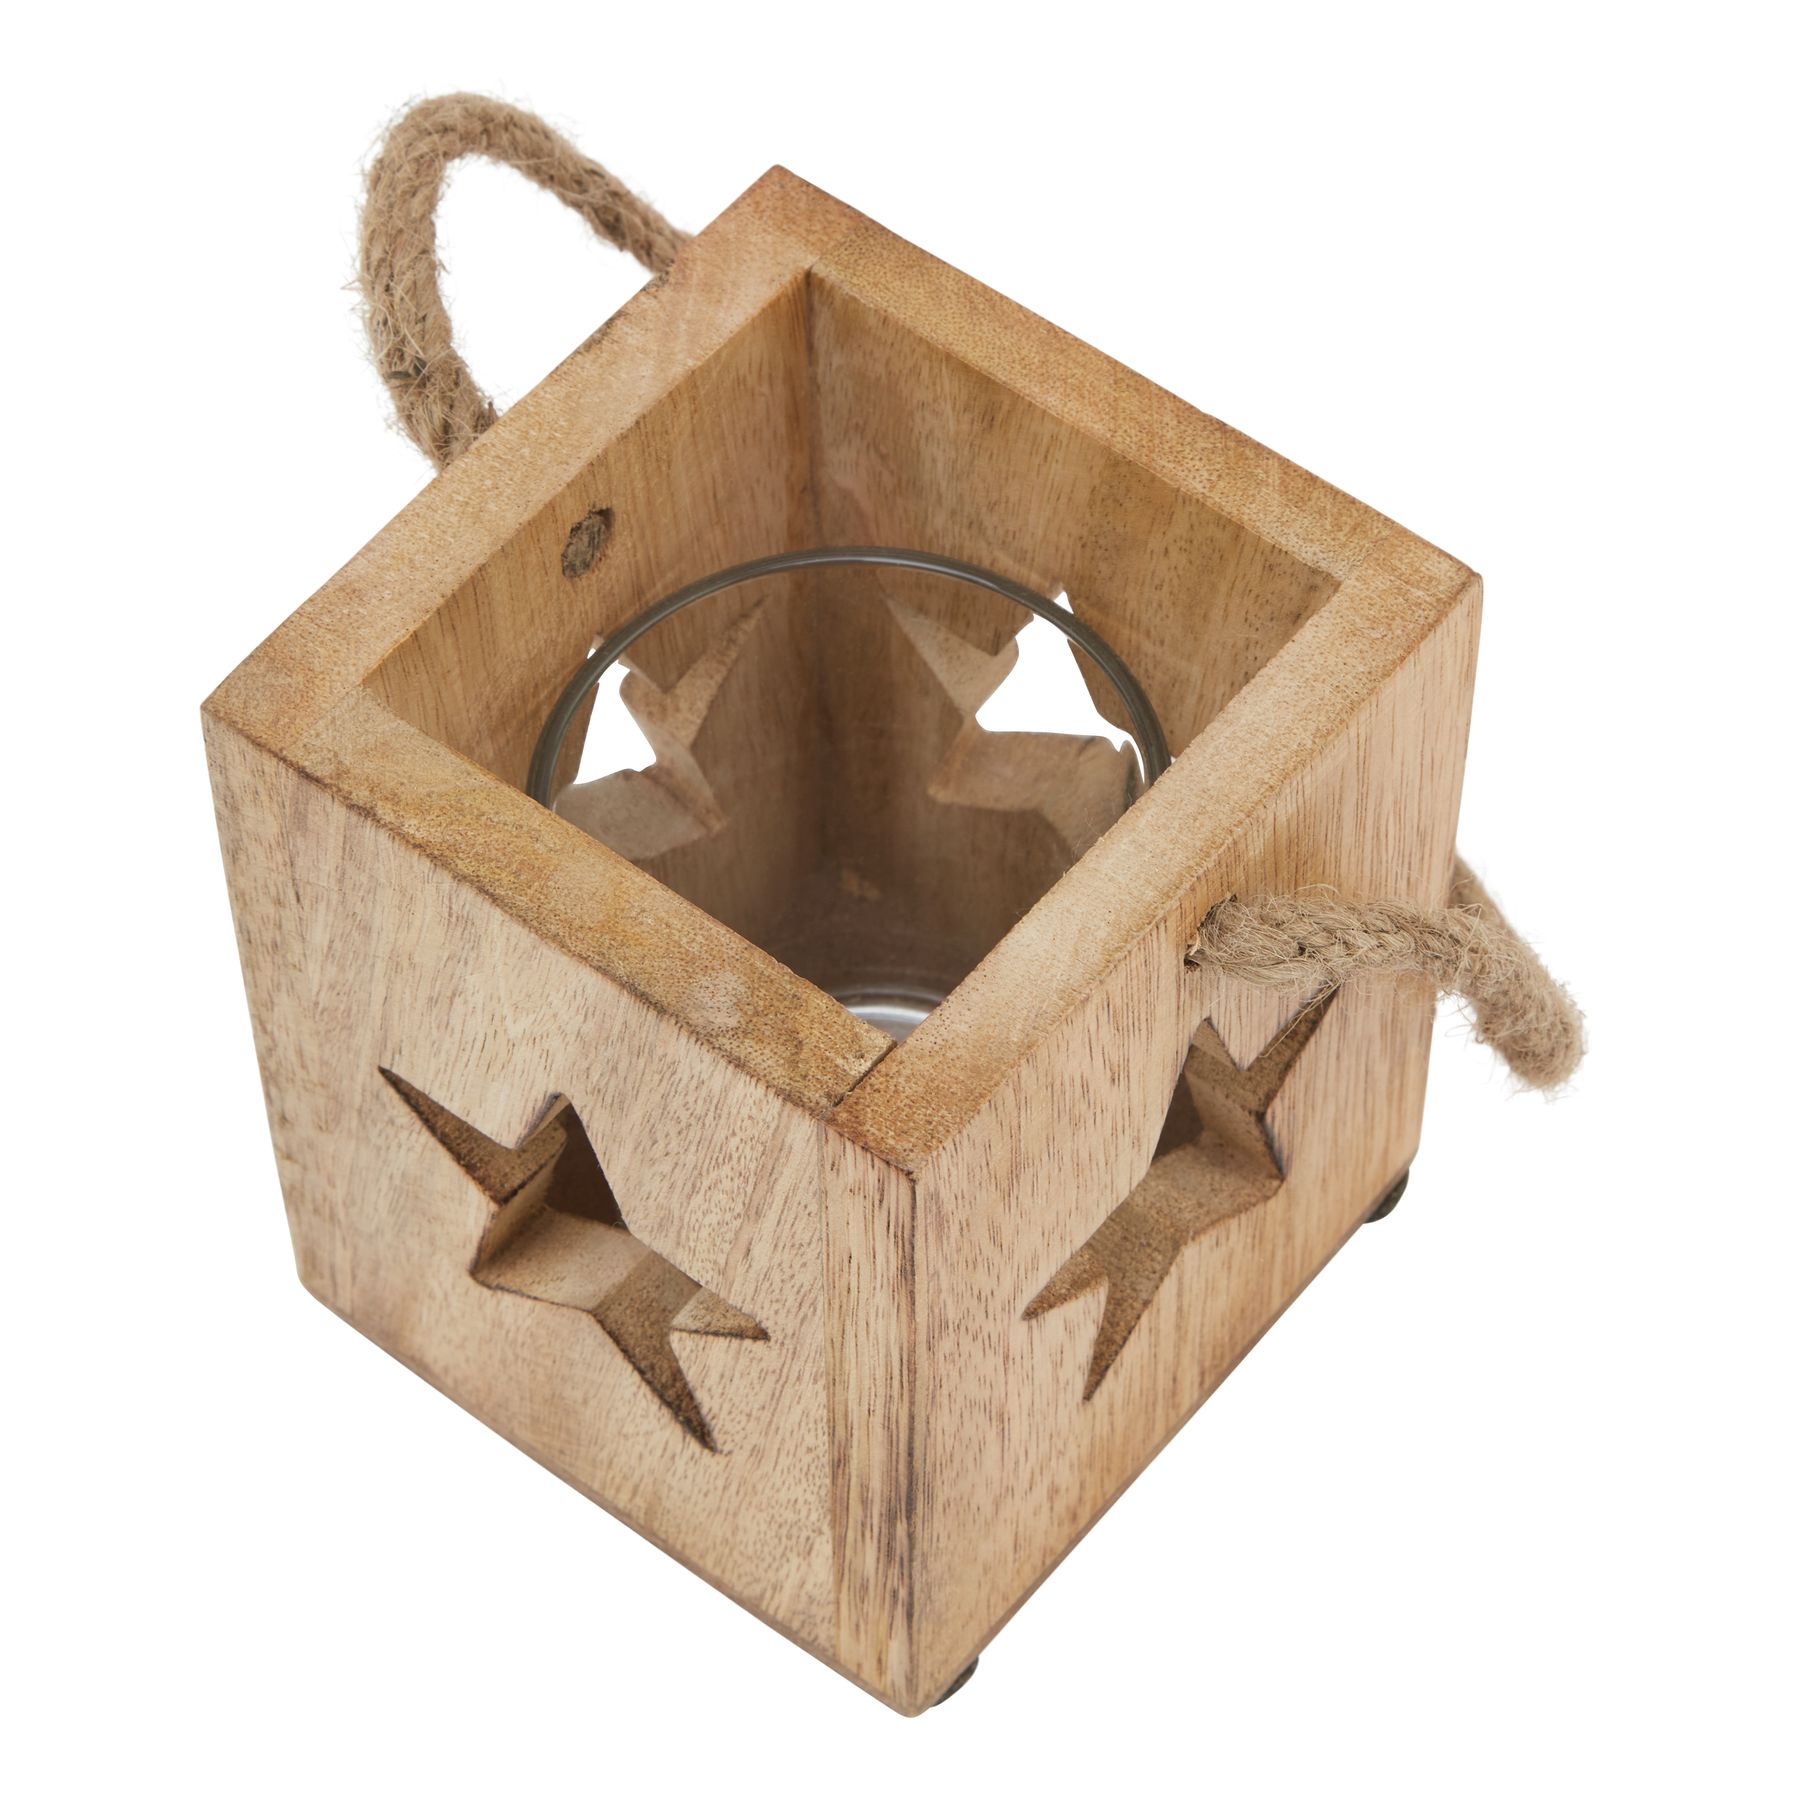 Natural Wooden Small Star Tealight Candle Holder - Image 2